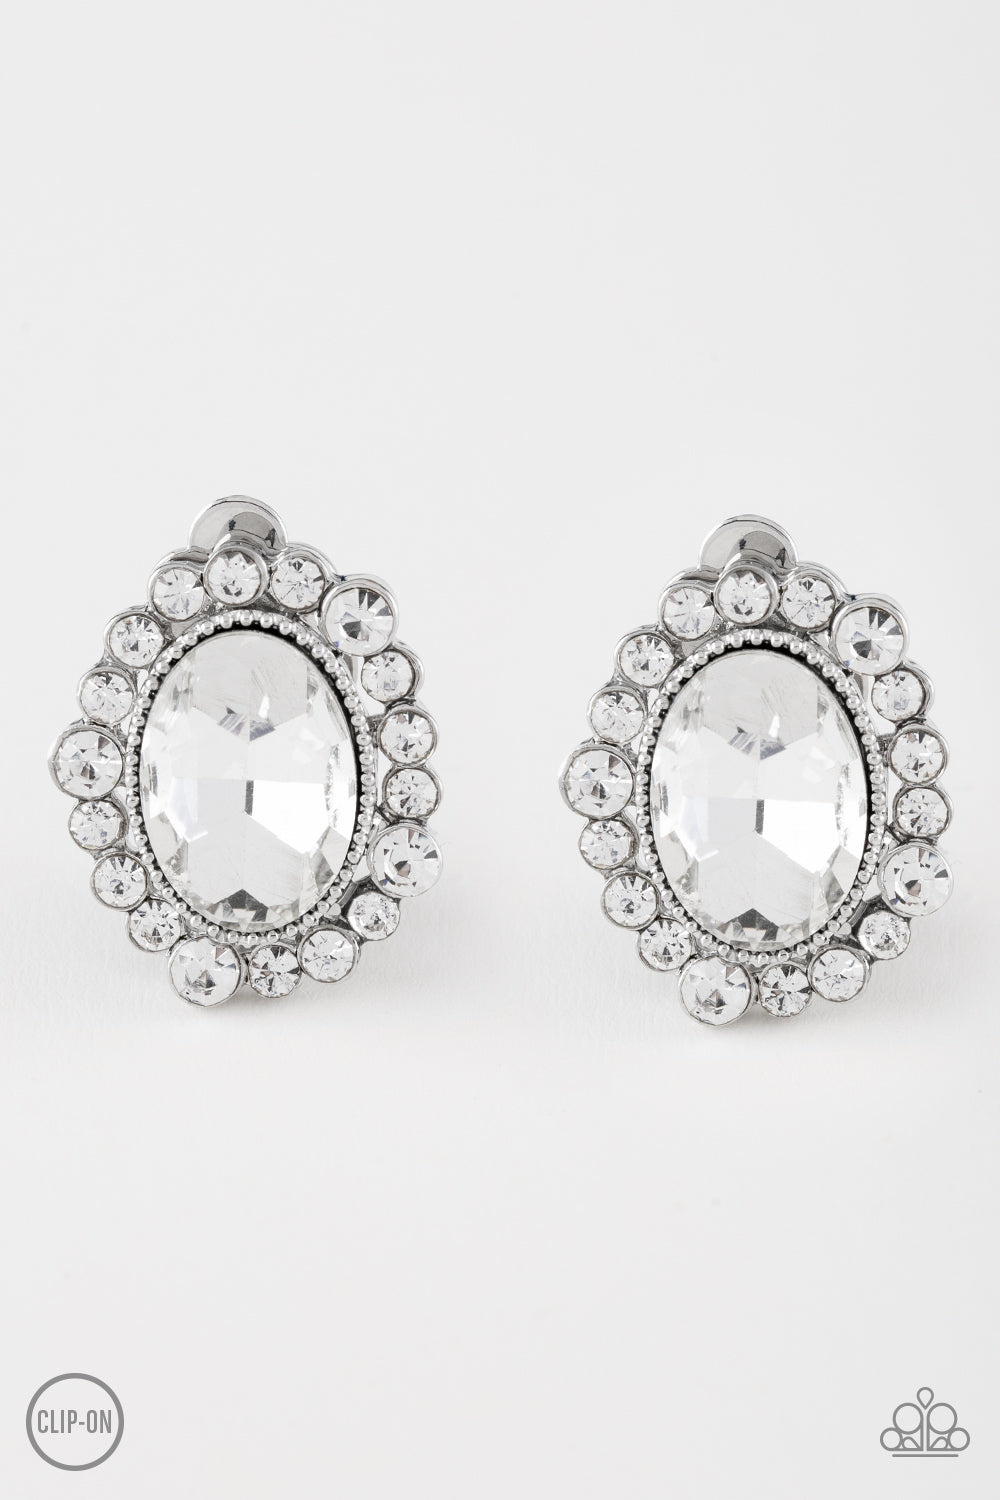 Hold Court - white - Paparazzi CLIP ON earrings